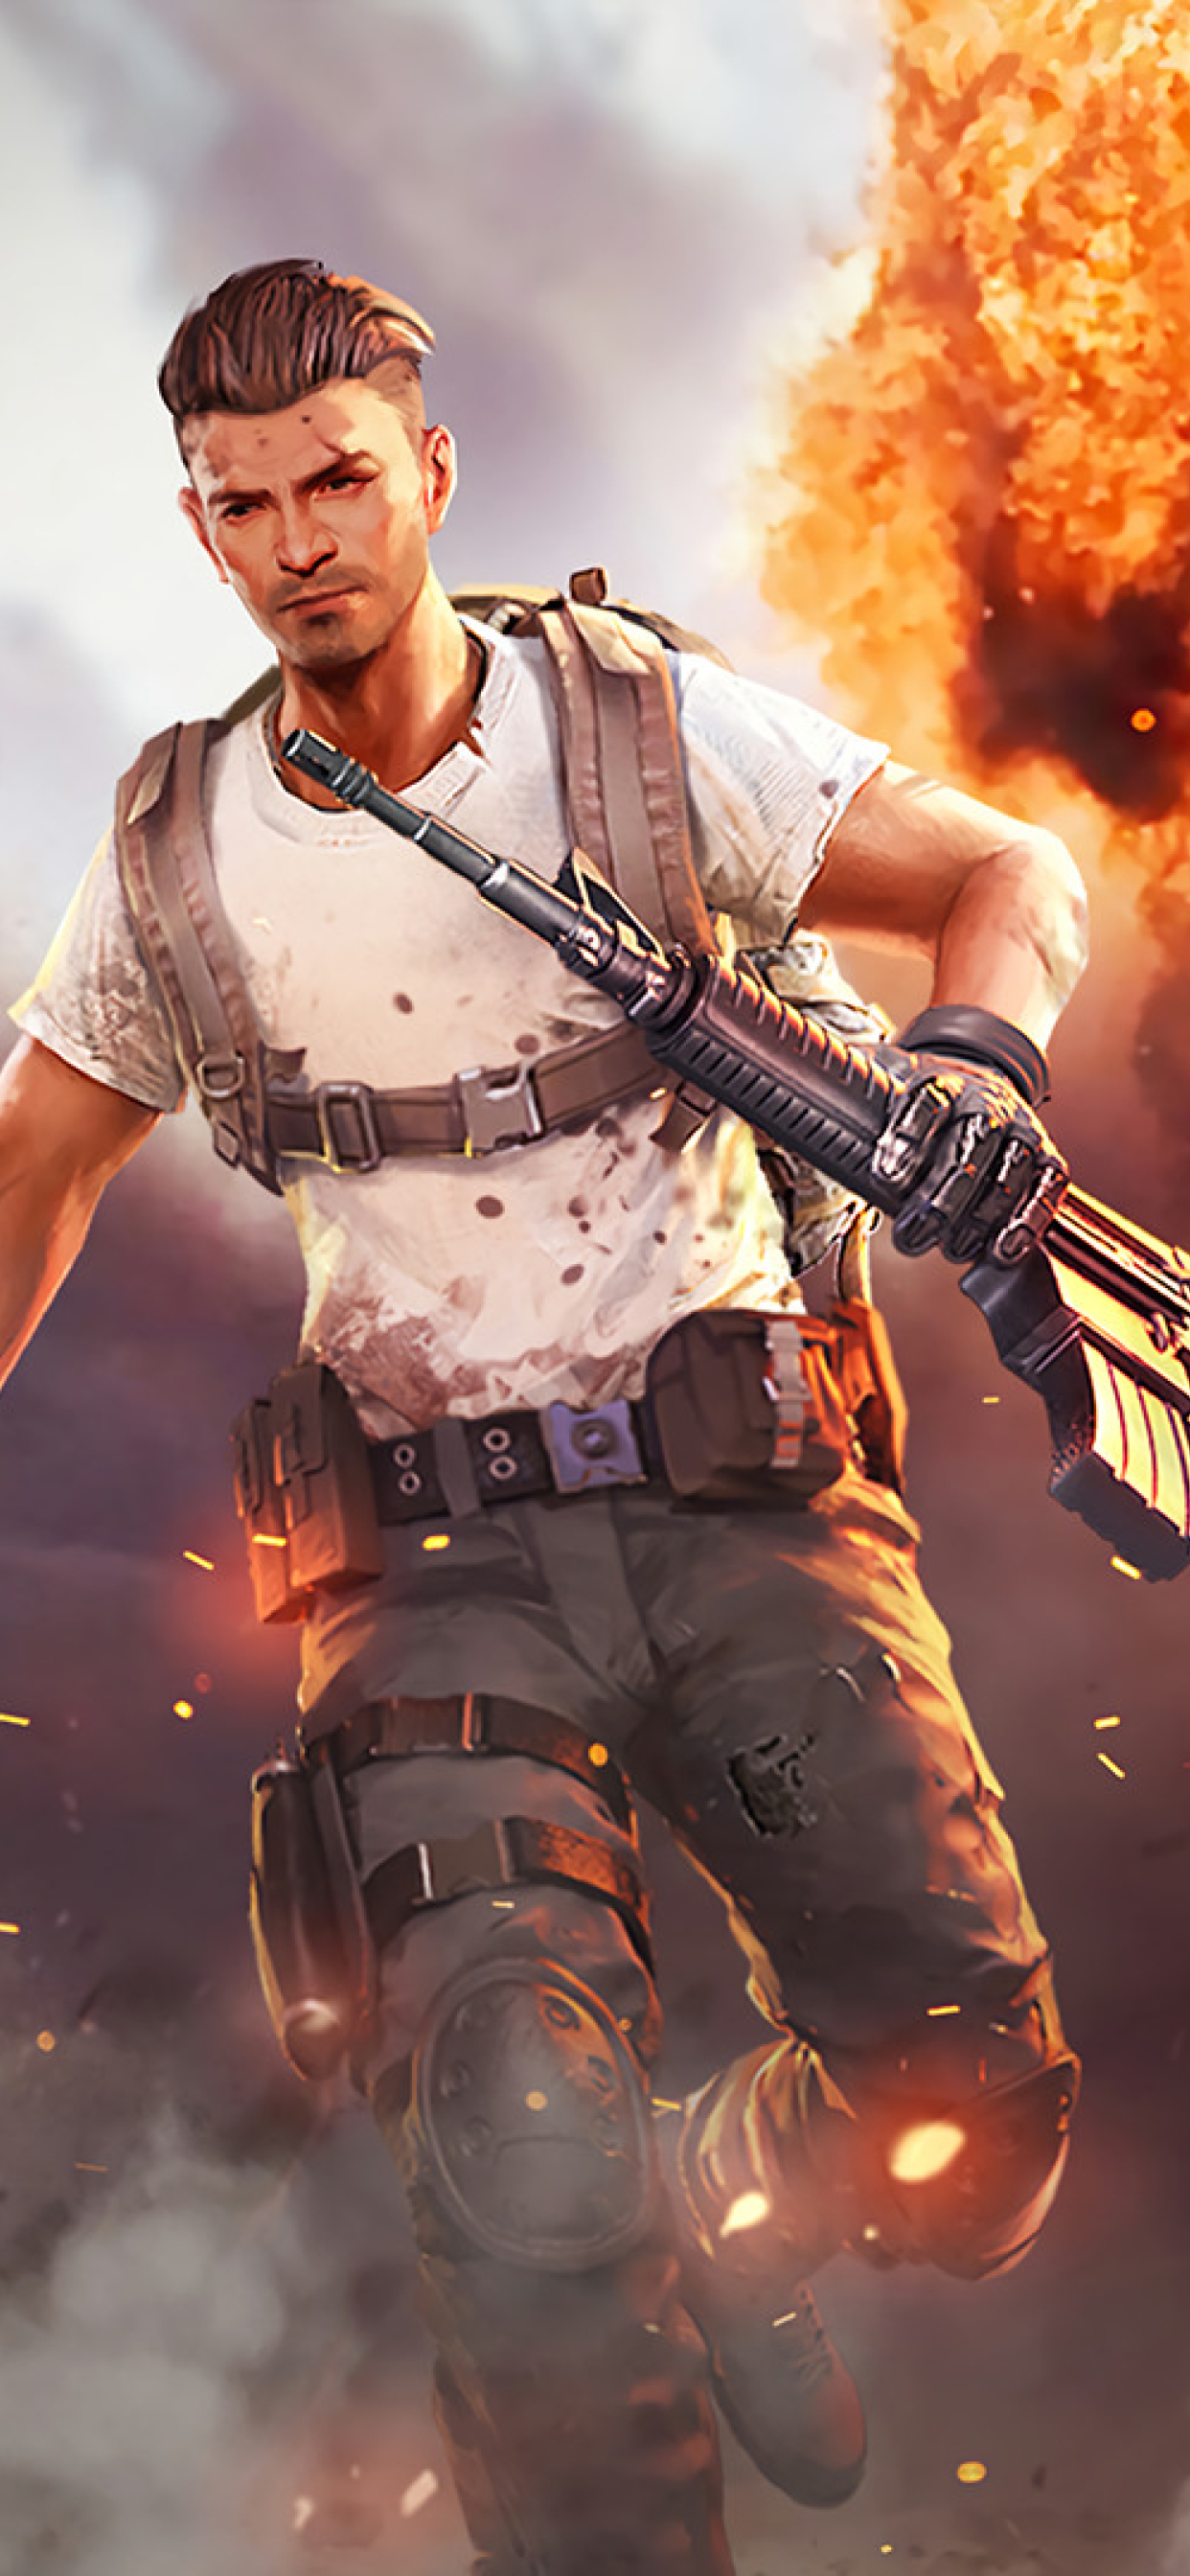 1242x26 Garena Free Fire Explosion Iphone Xs Max Wallpaper Hd Games 4k Wallpapers Images Photos And Background Wallpapers Den